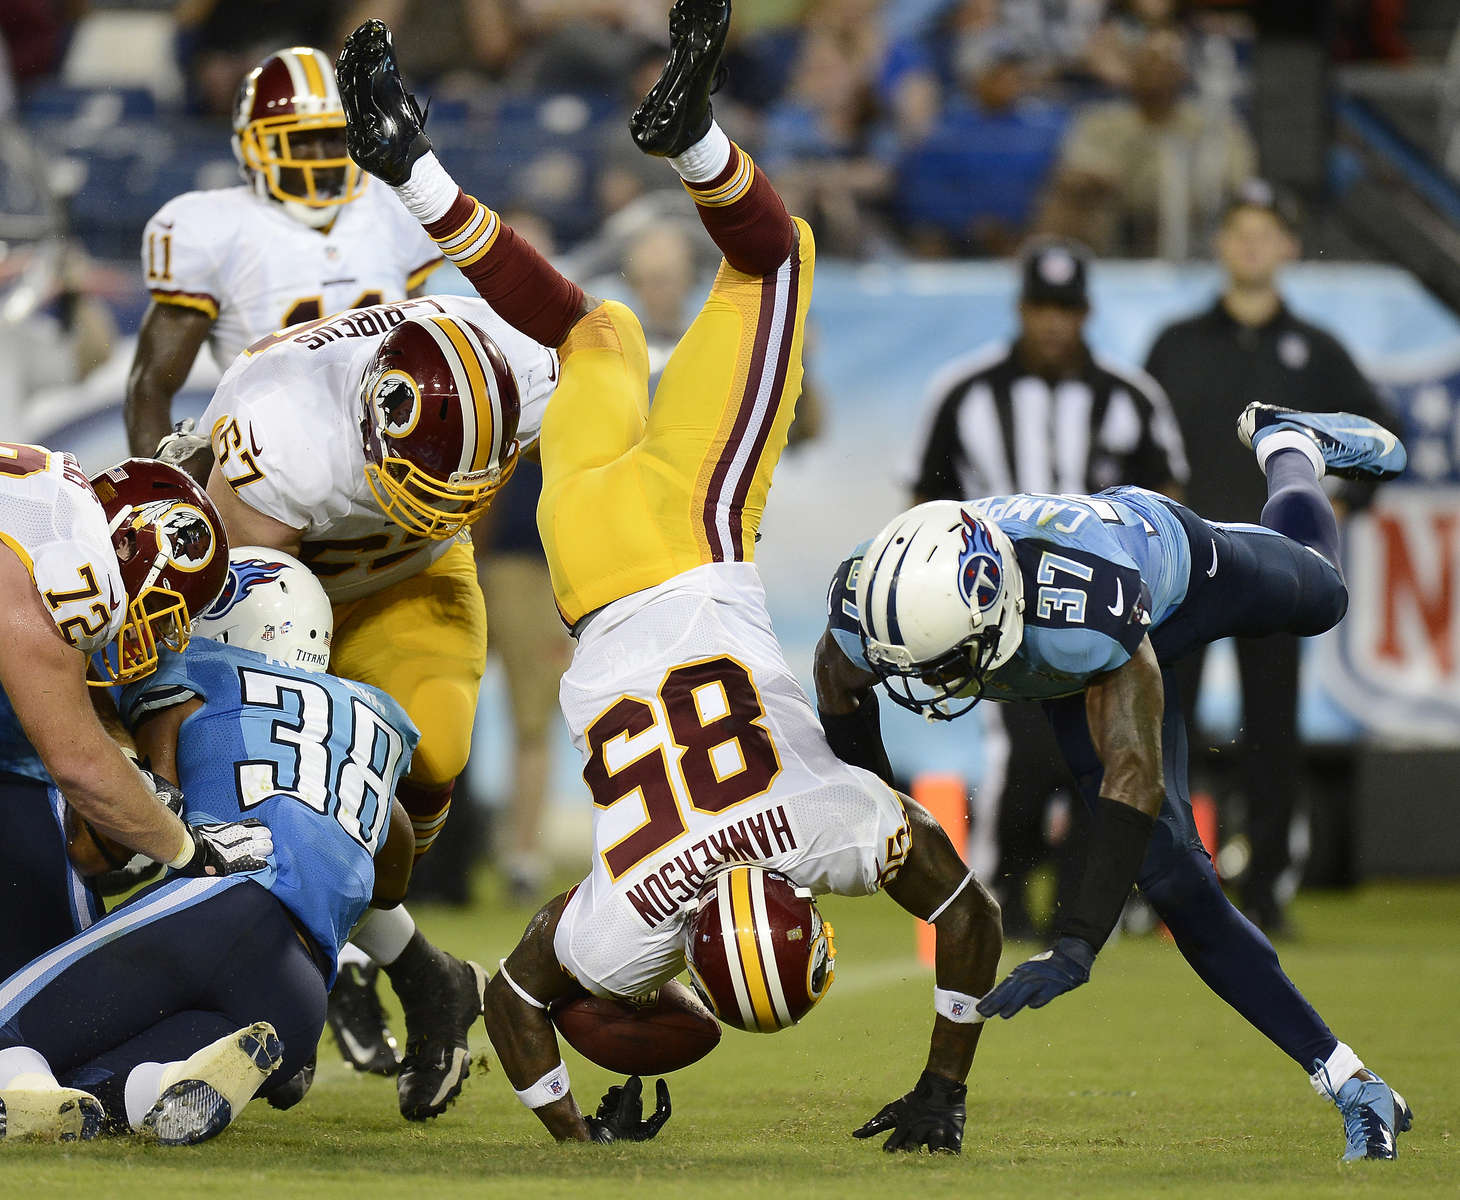 Washington Redskins wide receiver Leonard Hankerson flips into the end zone as he scores a touchdown on an 8-yard pass play against the Tennessee Titans in the second quarter of a preseason NFL football game on Aug. 8, 2013, in Nashville, Tenn. (AP Photo/ Mark Zaleski)